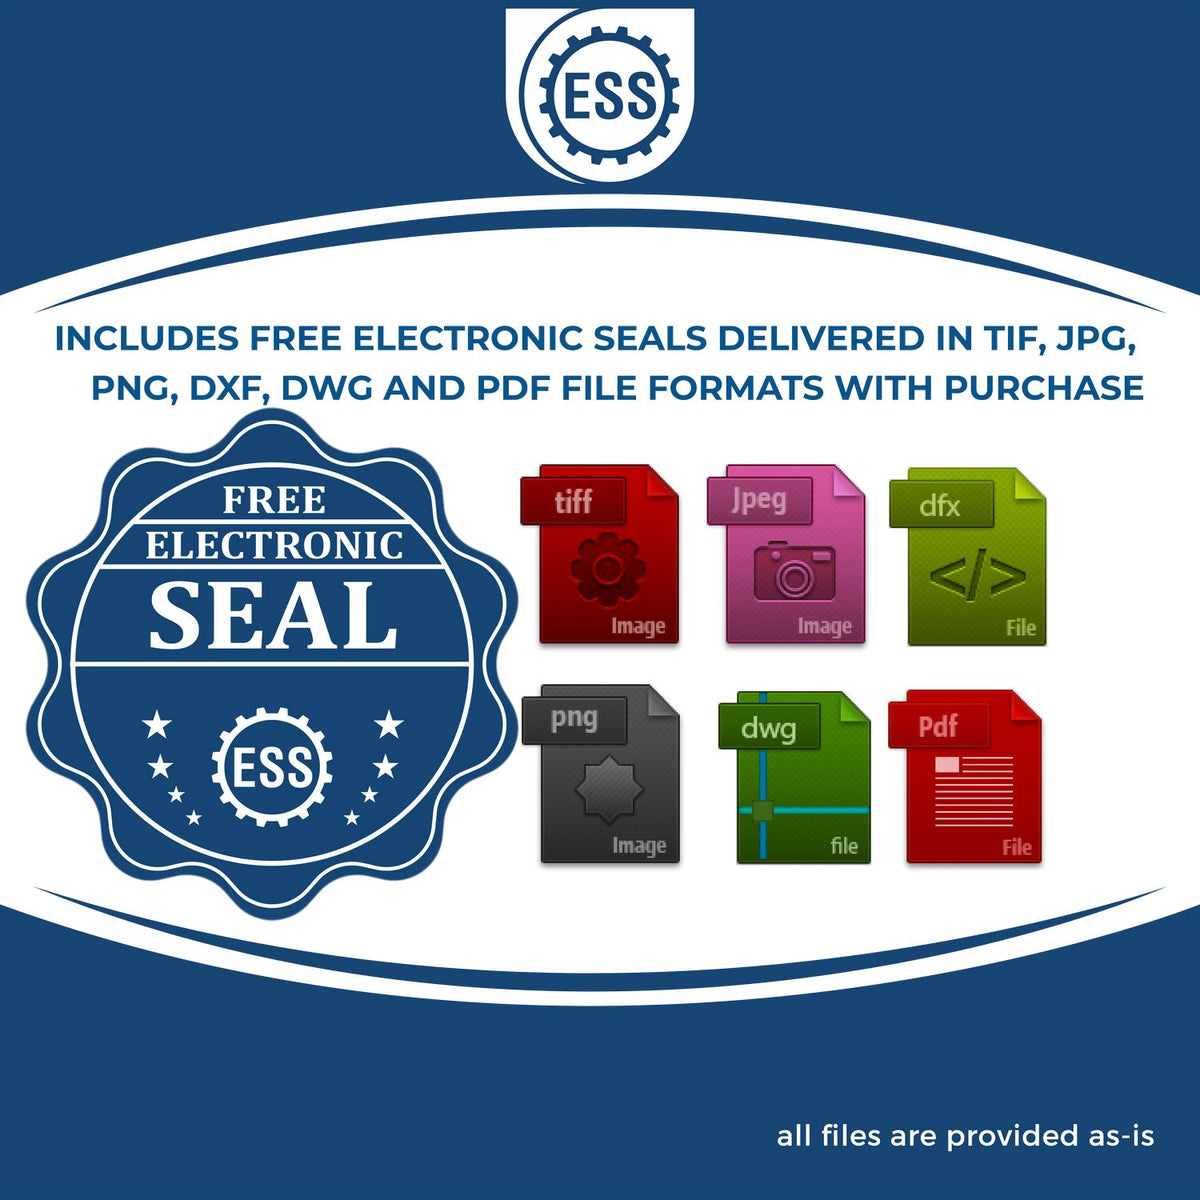 An infographic for the free electronic seal for the Gift Rhode Island Architect Seal illustrating the different file type icons such as DXF, DWG, TIF, JPG and PNG.